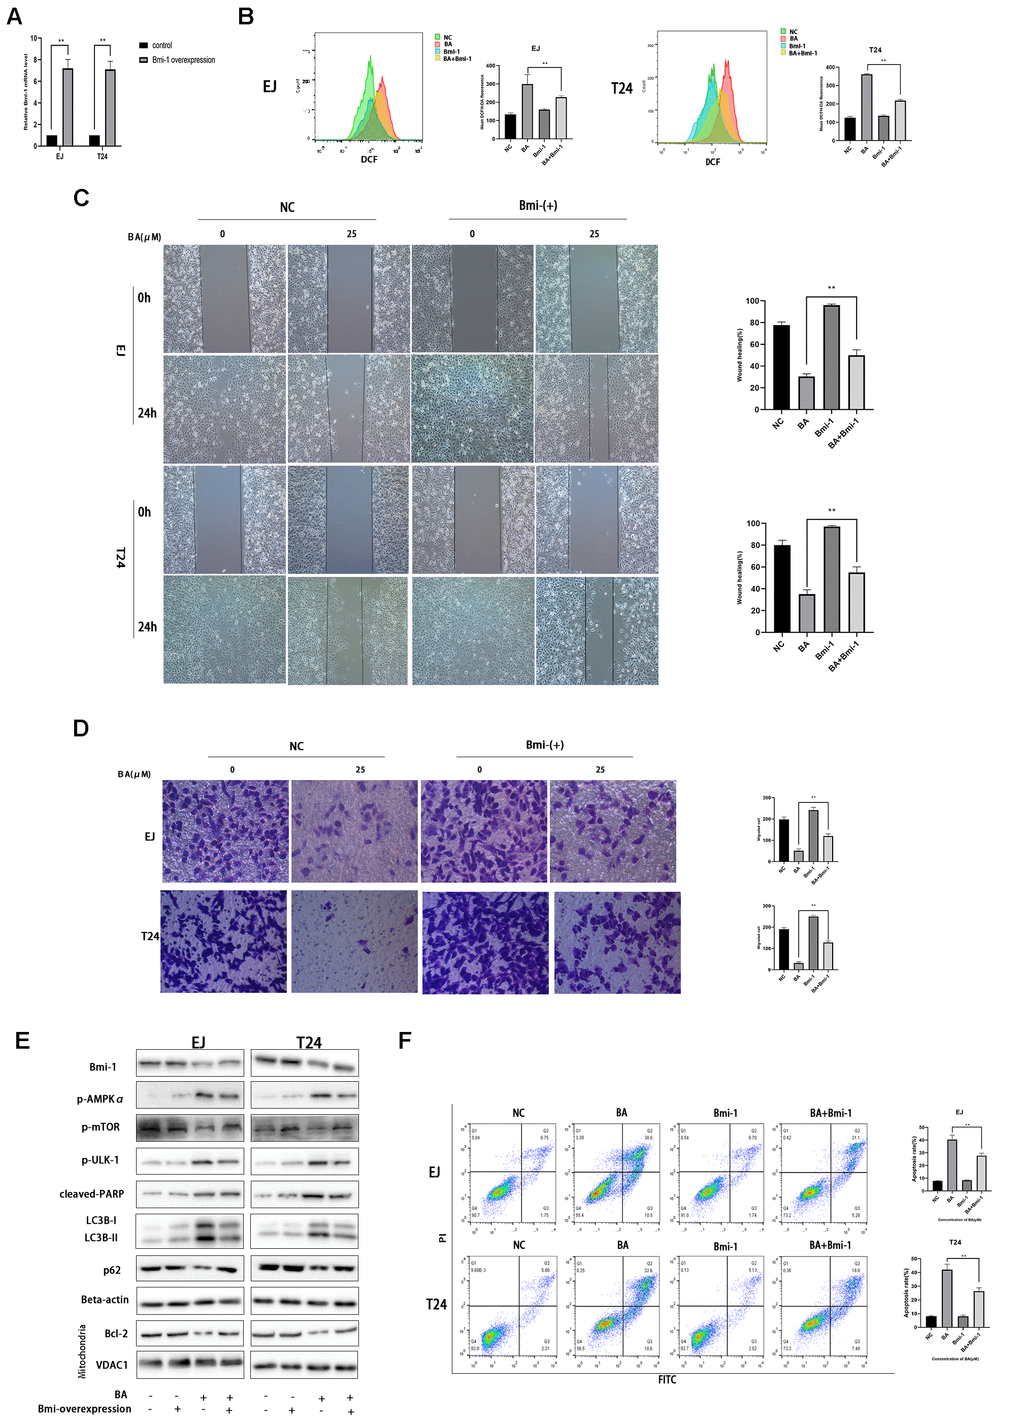 Bmi-1 overexpression partially reverses BA-induced ROS overproduction, migration inhibition, and autophagy-dependent apoptosis. Stable overexpression of Bmi-1 was established in EJ and T24 cells (EJ-con/EJ-Bmi-1 and T24-con/T24-Bmi-1) via lentiviral transduction before exposure to BA. (A) RT-qPCR analysis of relative Bmi-1 expression in control and Bmi-1-transduced cells. (B) Assessment of intracellular ROS contents. (C) Wound healing assay results. (D) Transwell migration analysis. (E) Western blot analysis of p-AMPKα, p-mTOR, p-ULK1, Bcl-2, cleaved caspase-3, Bmi-1, LC3B-II, p62, and cleaved PARP expression. (F) Apoptosis determination by flow cytometry. *pp